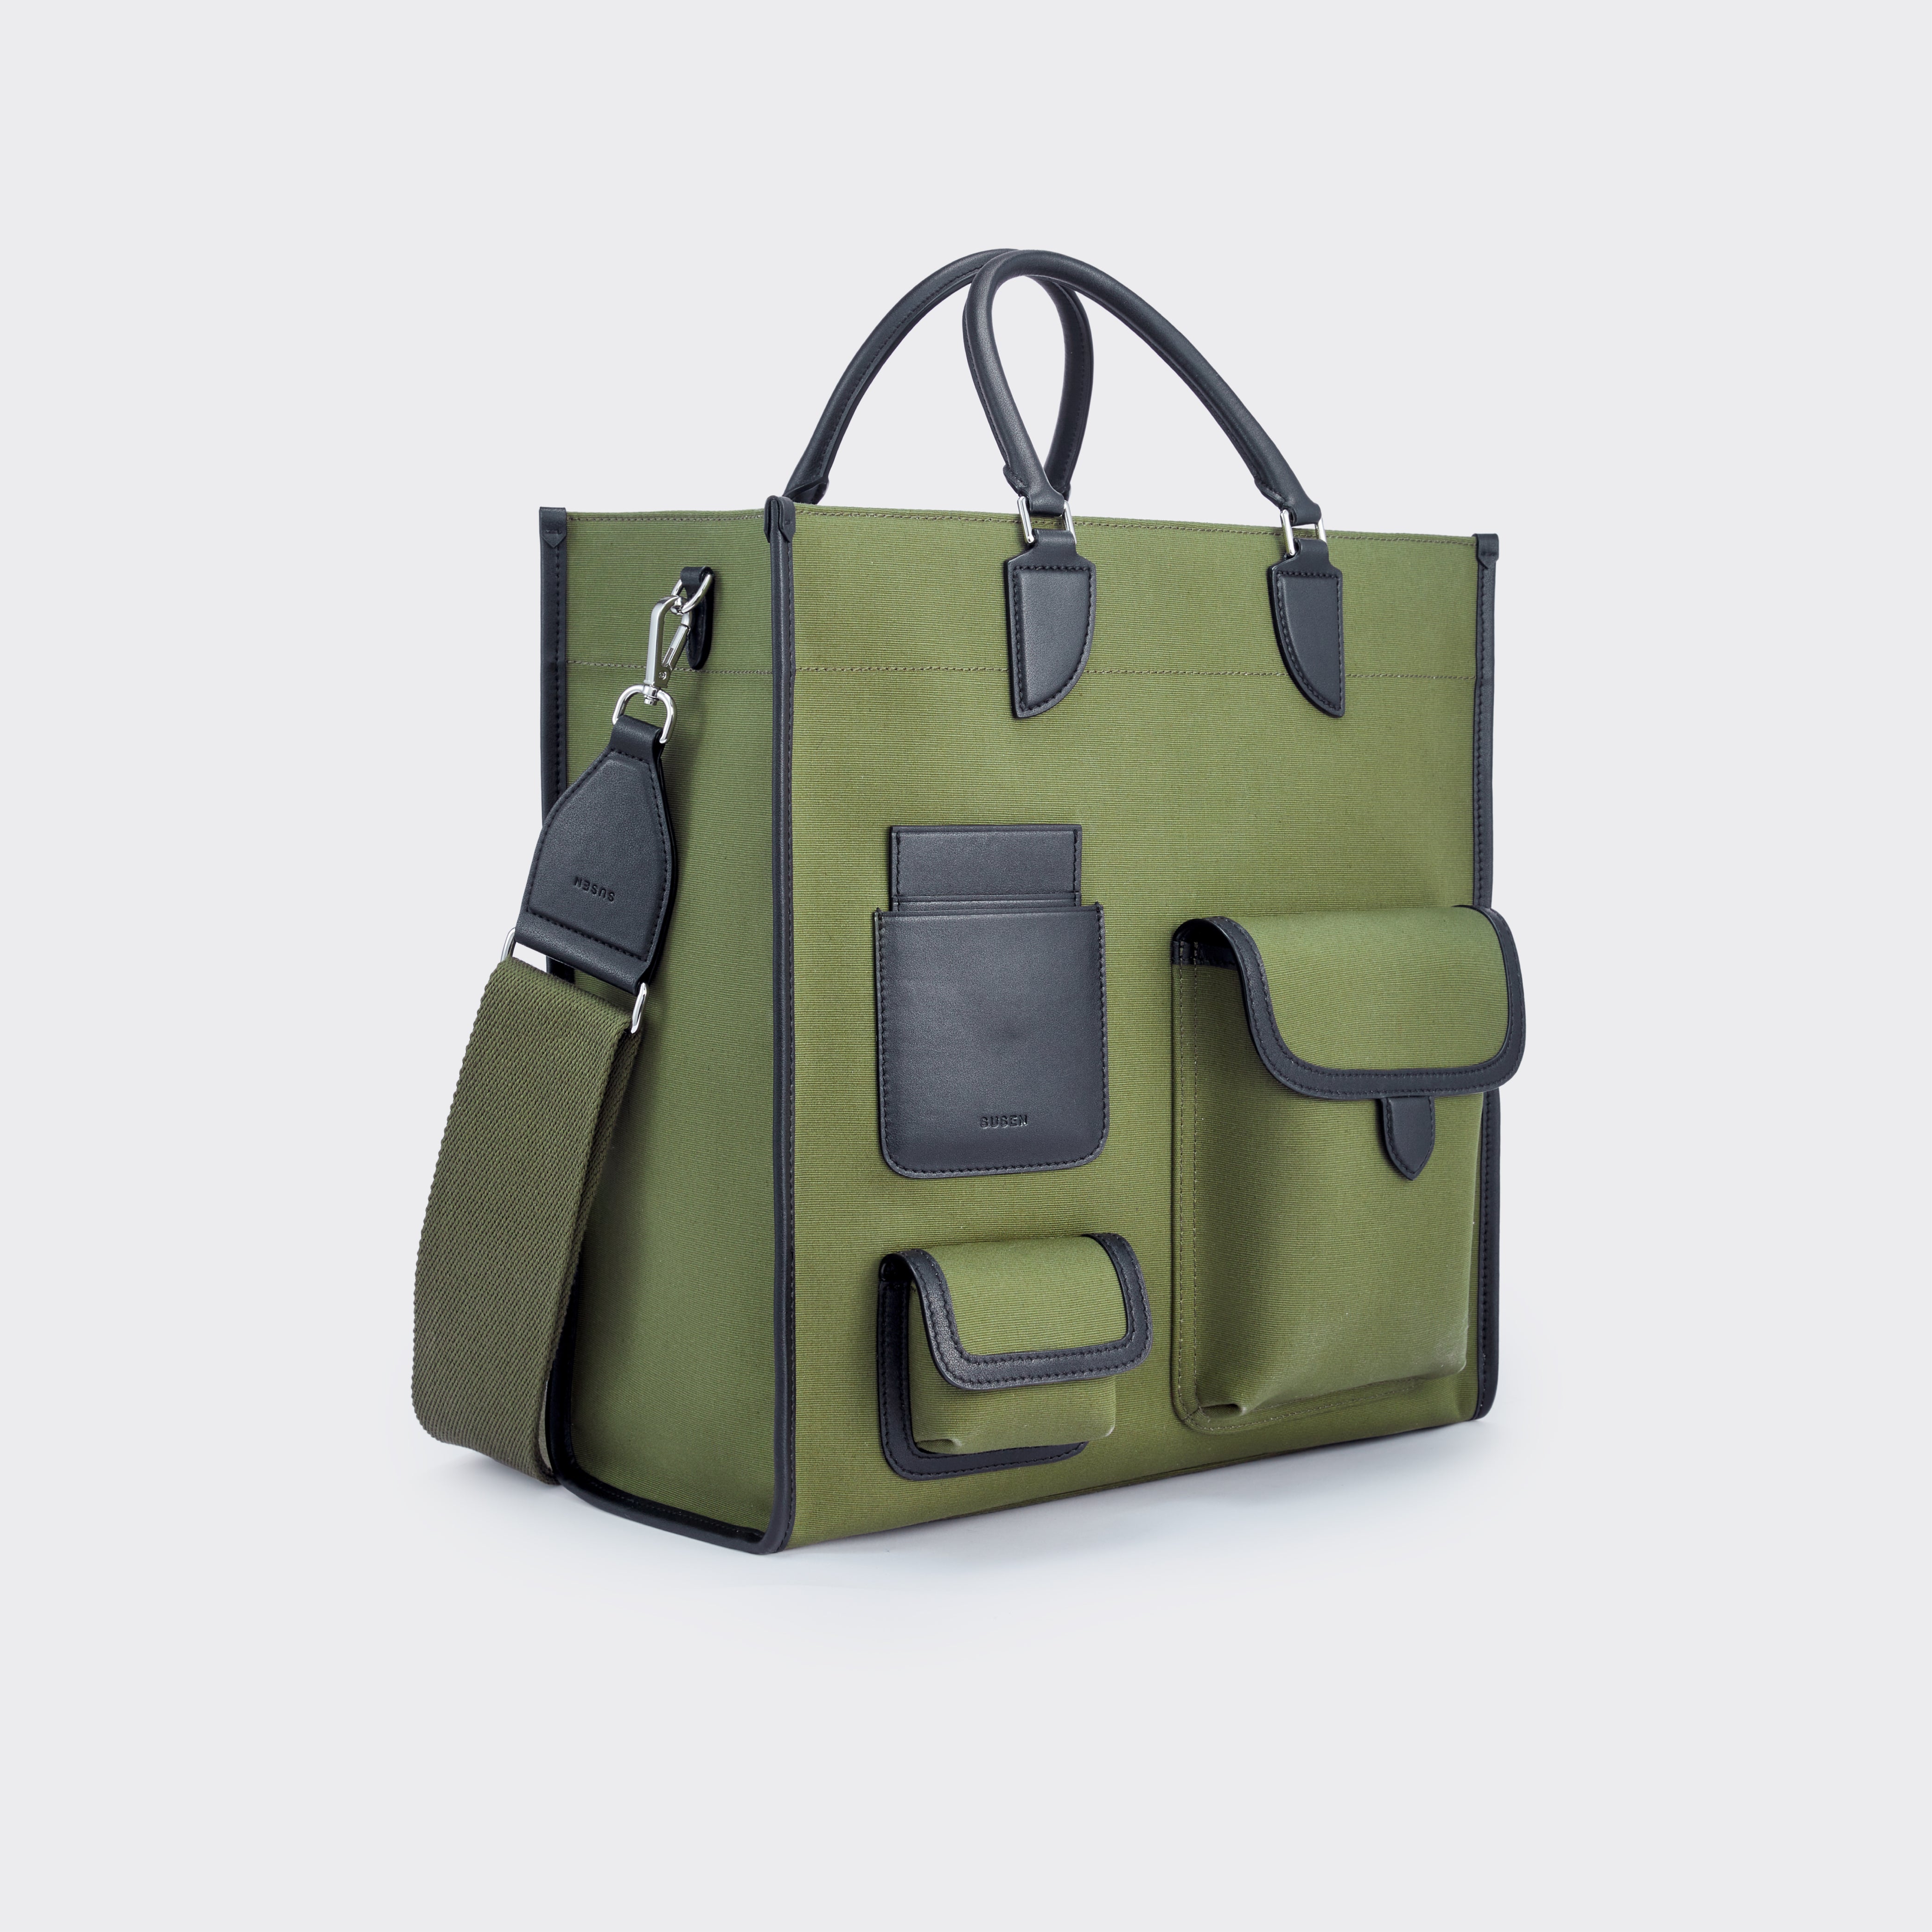 Gabriel Large Vertical Canvas Tote Bag  - Military green